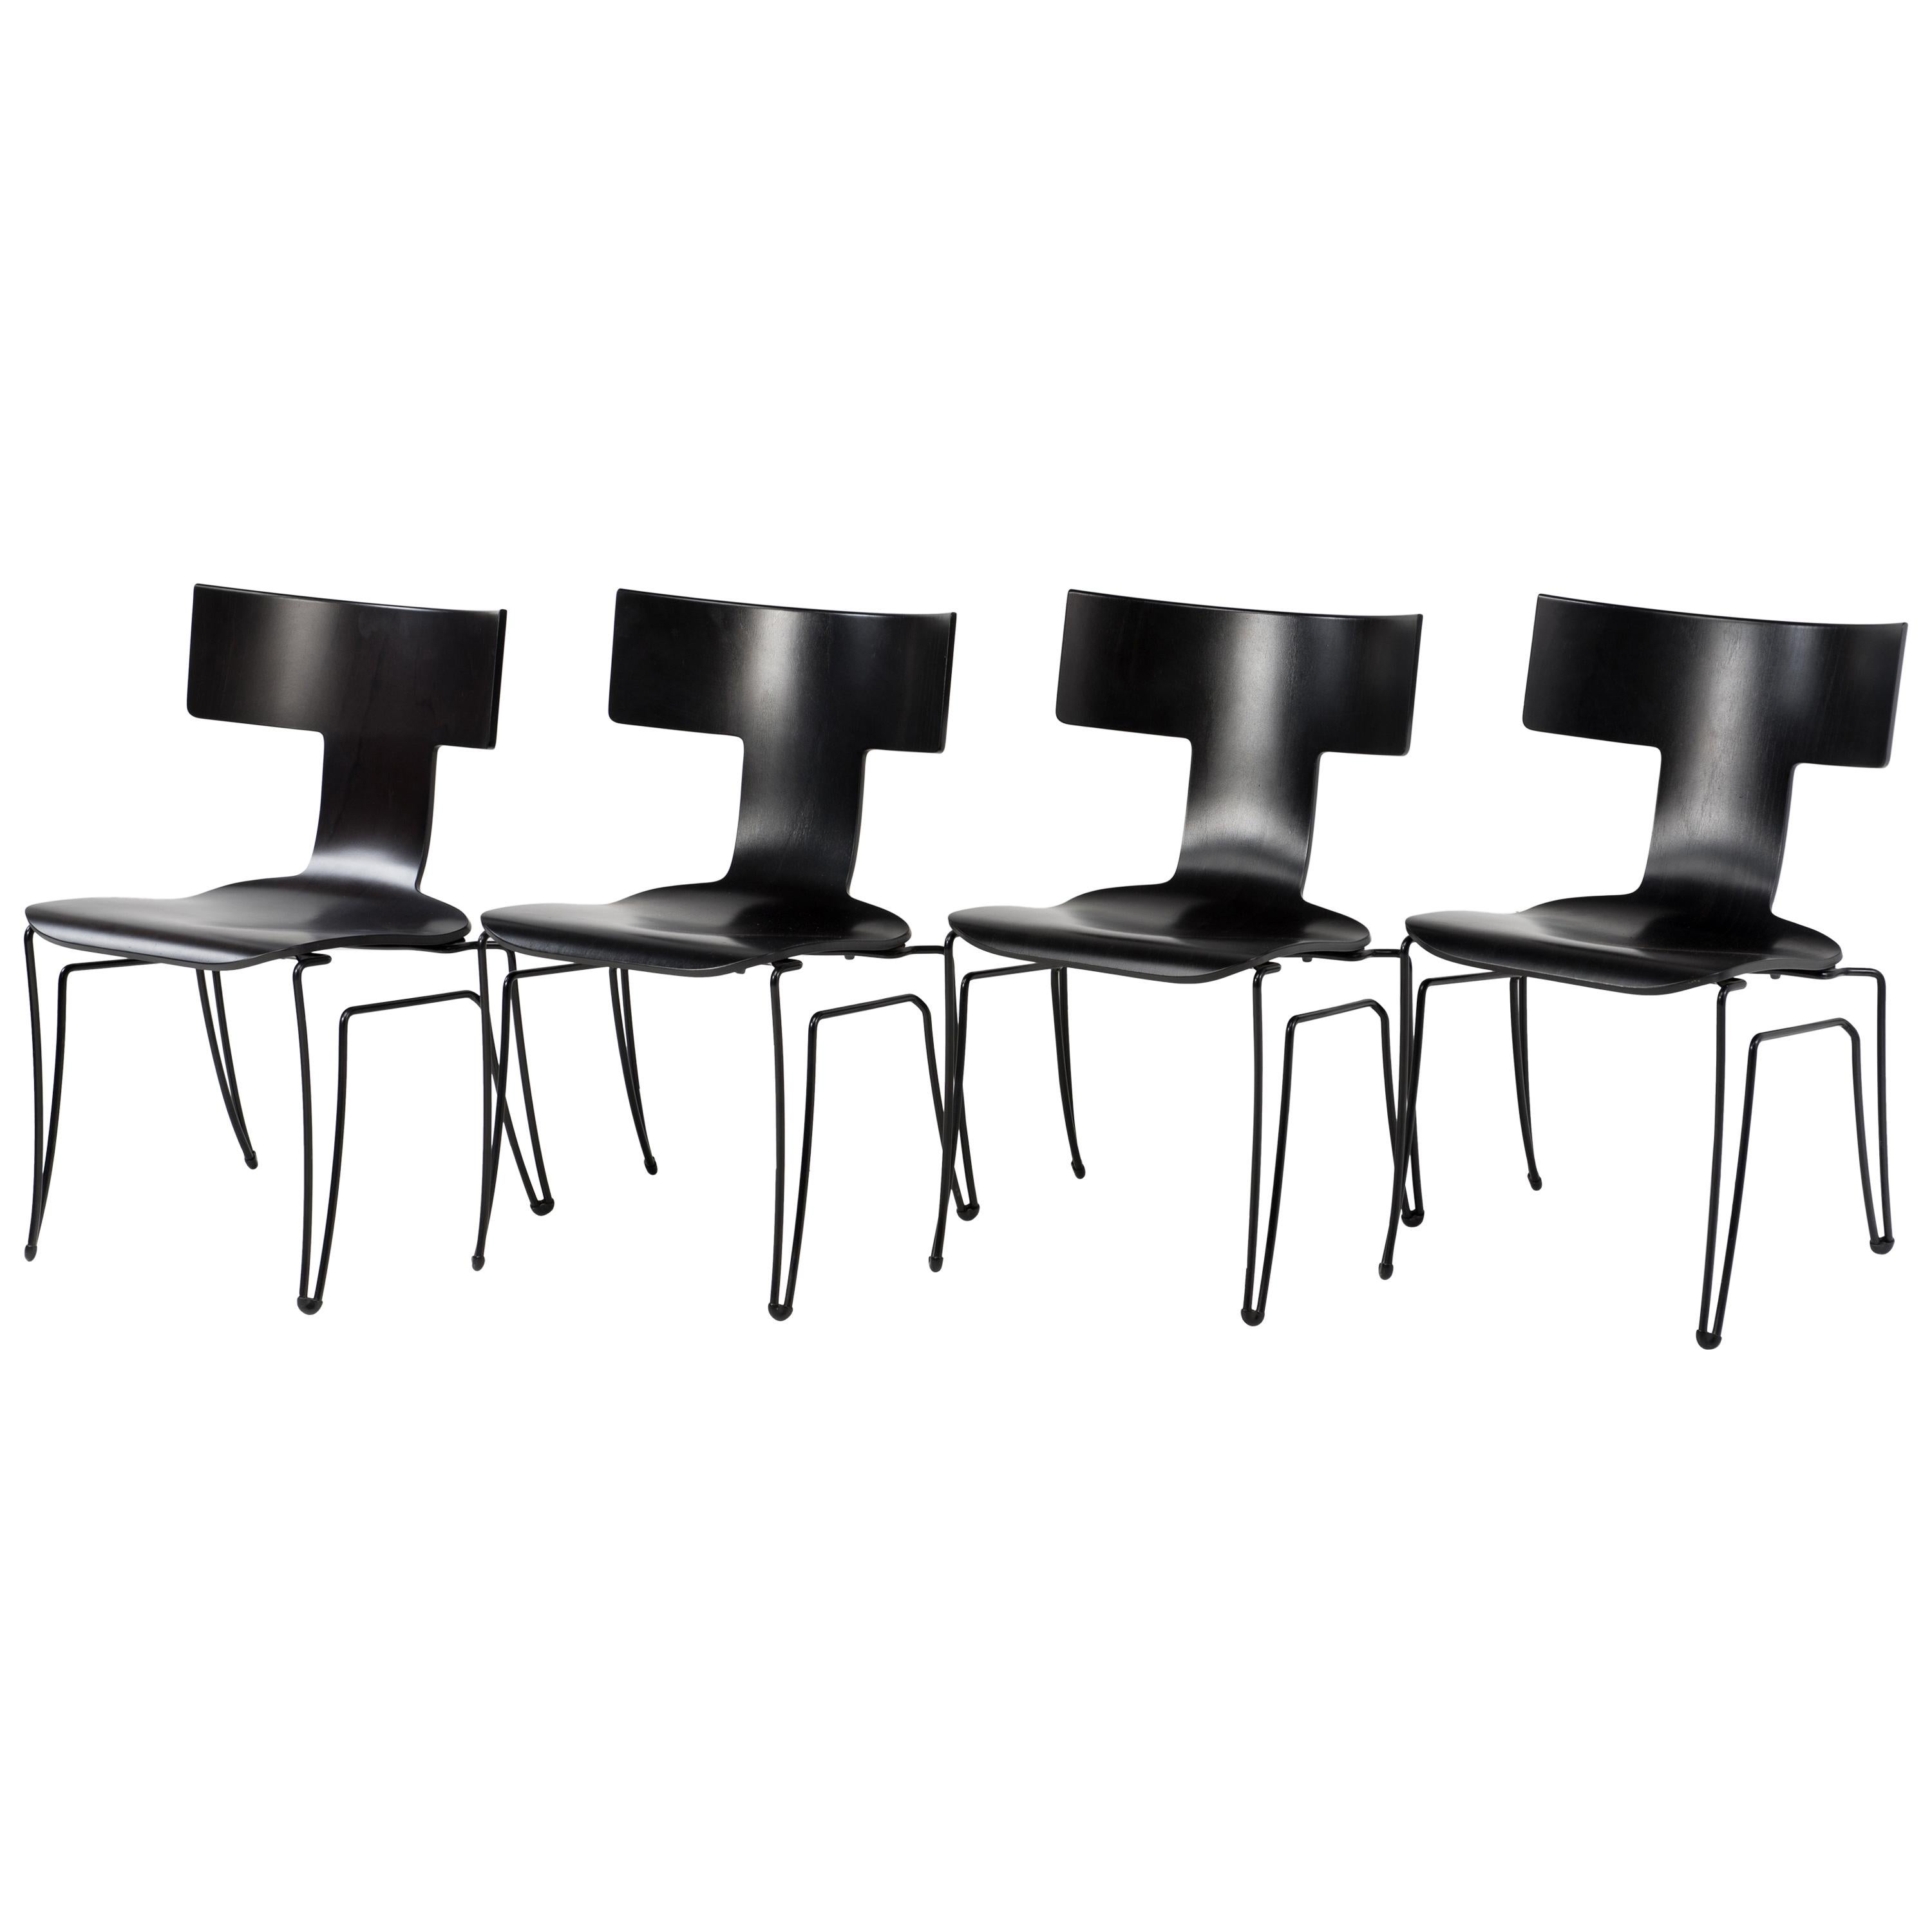 Set of 4 Klismos Style Anziano Dining Chairs by John Hutton for Donghia